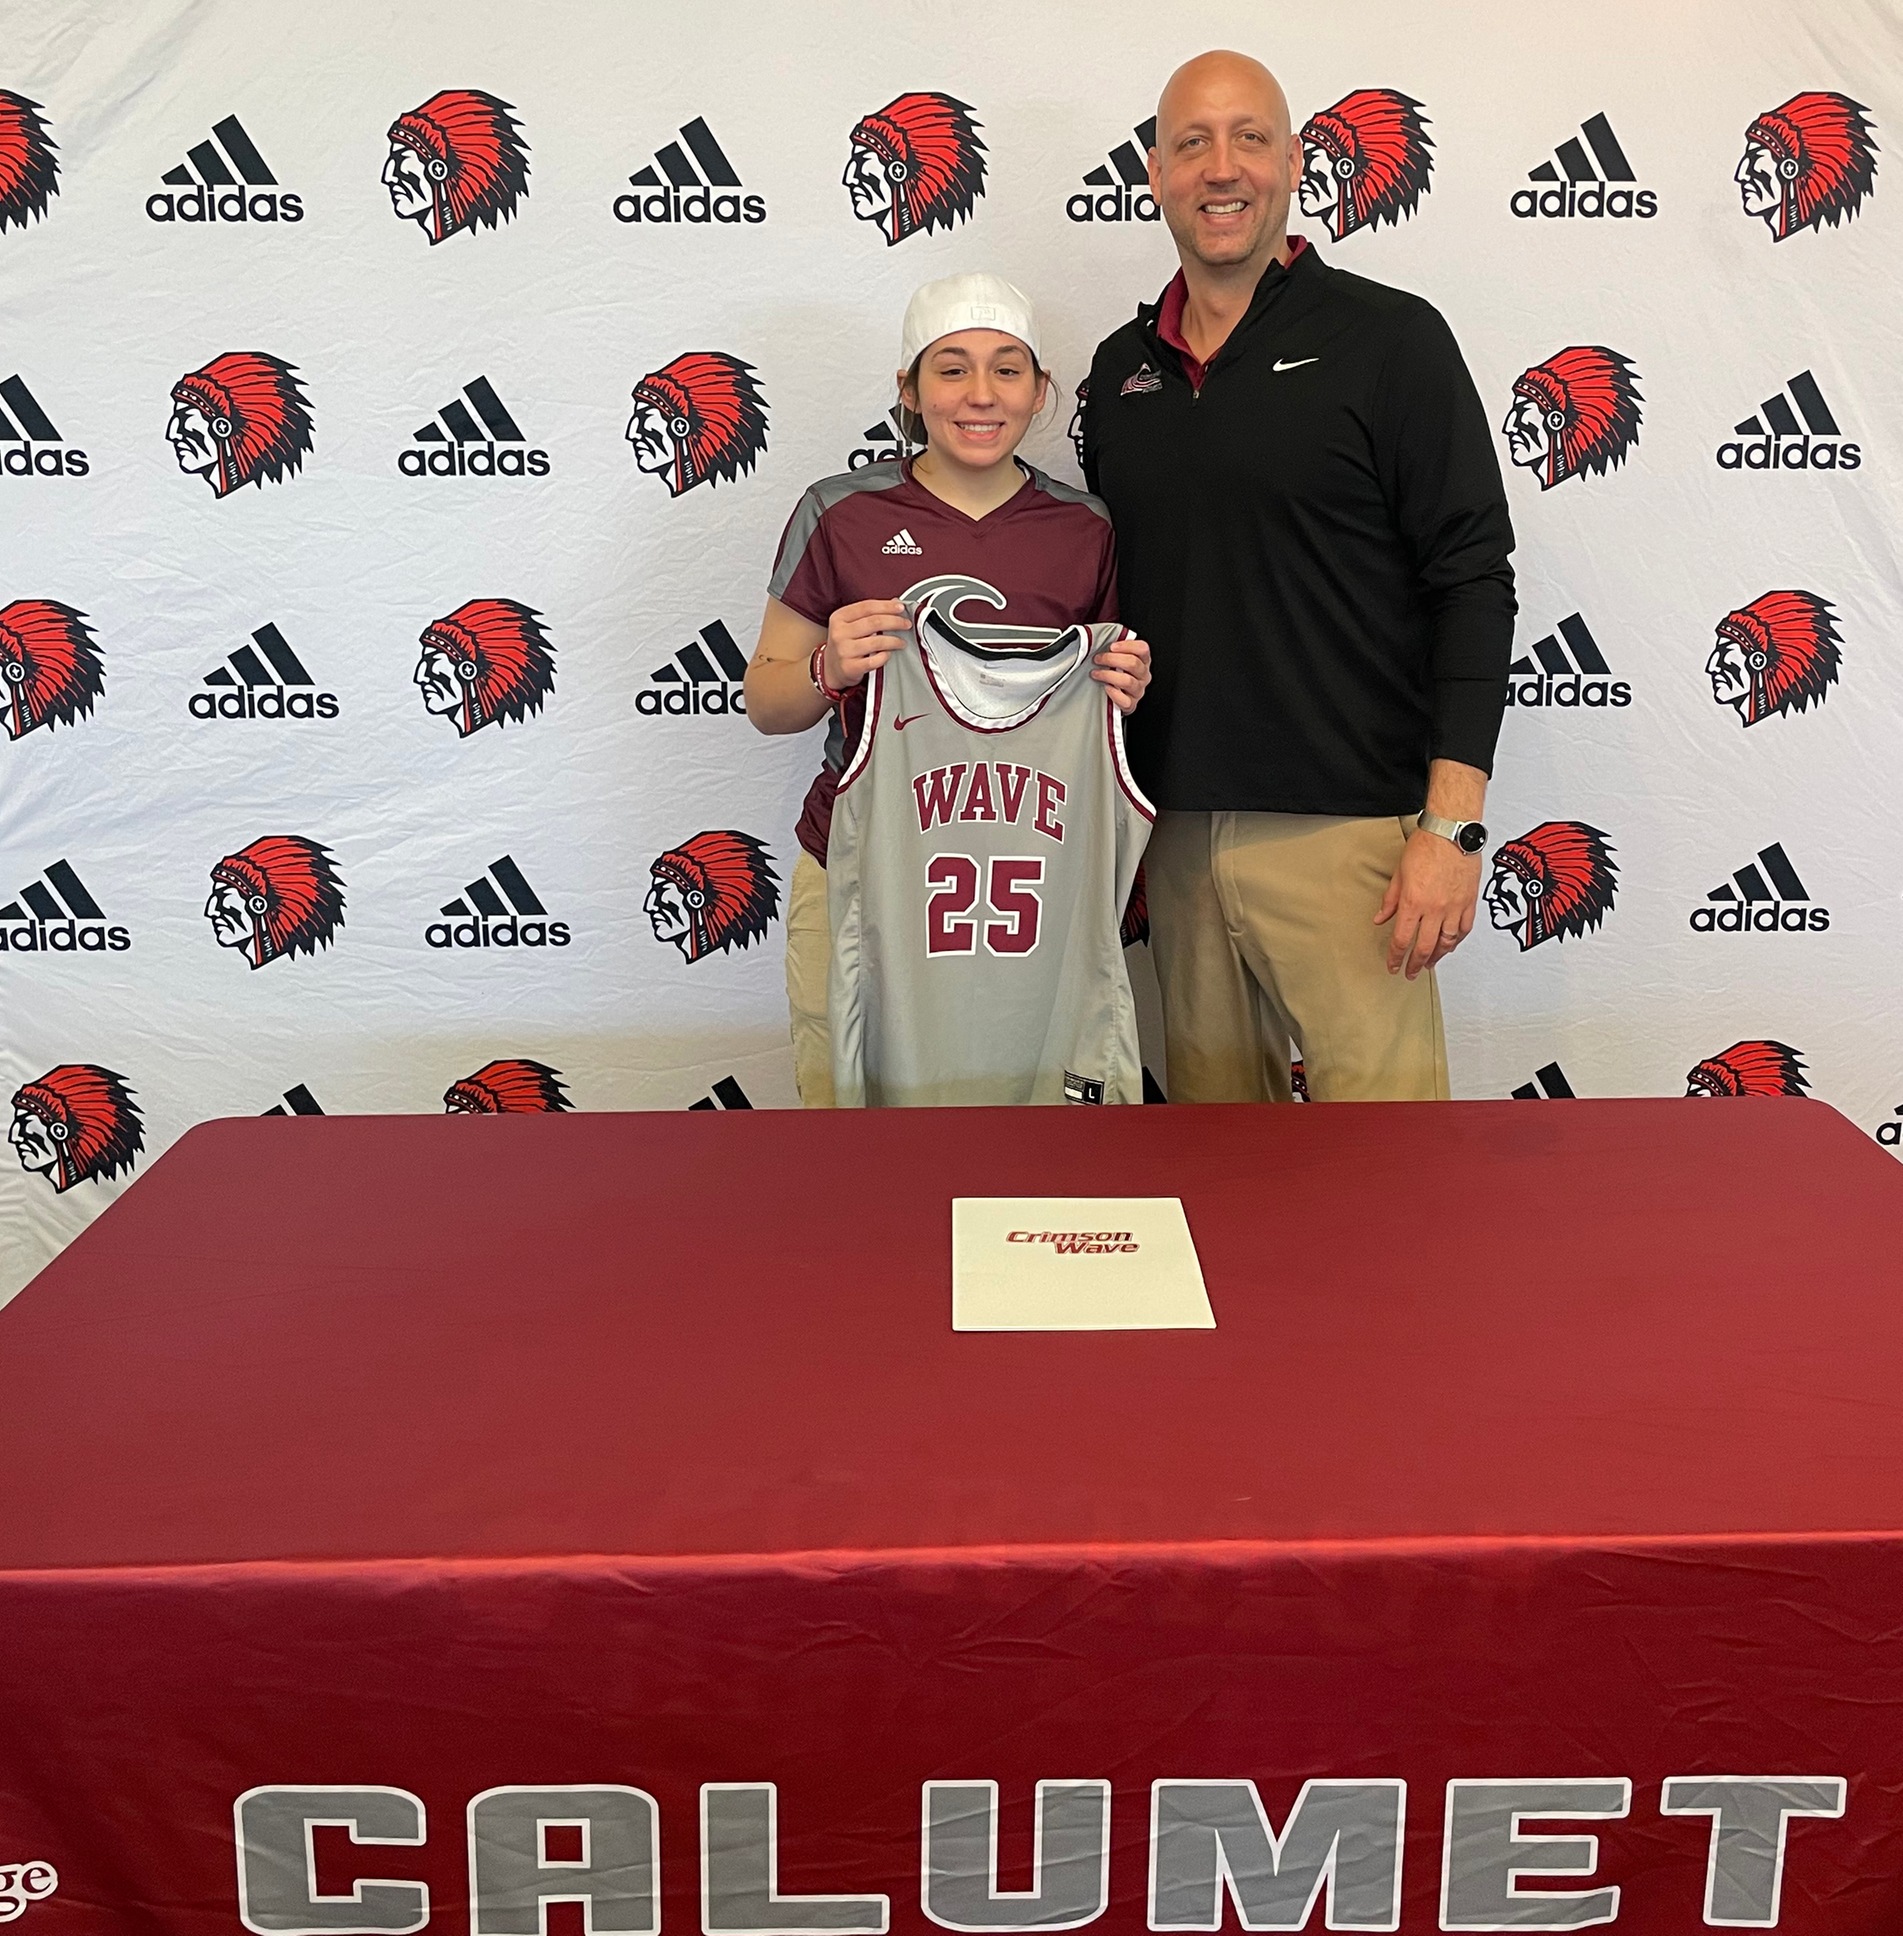 Portage High School’s Wilson signs with Women’s Basketball for 23-24 season